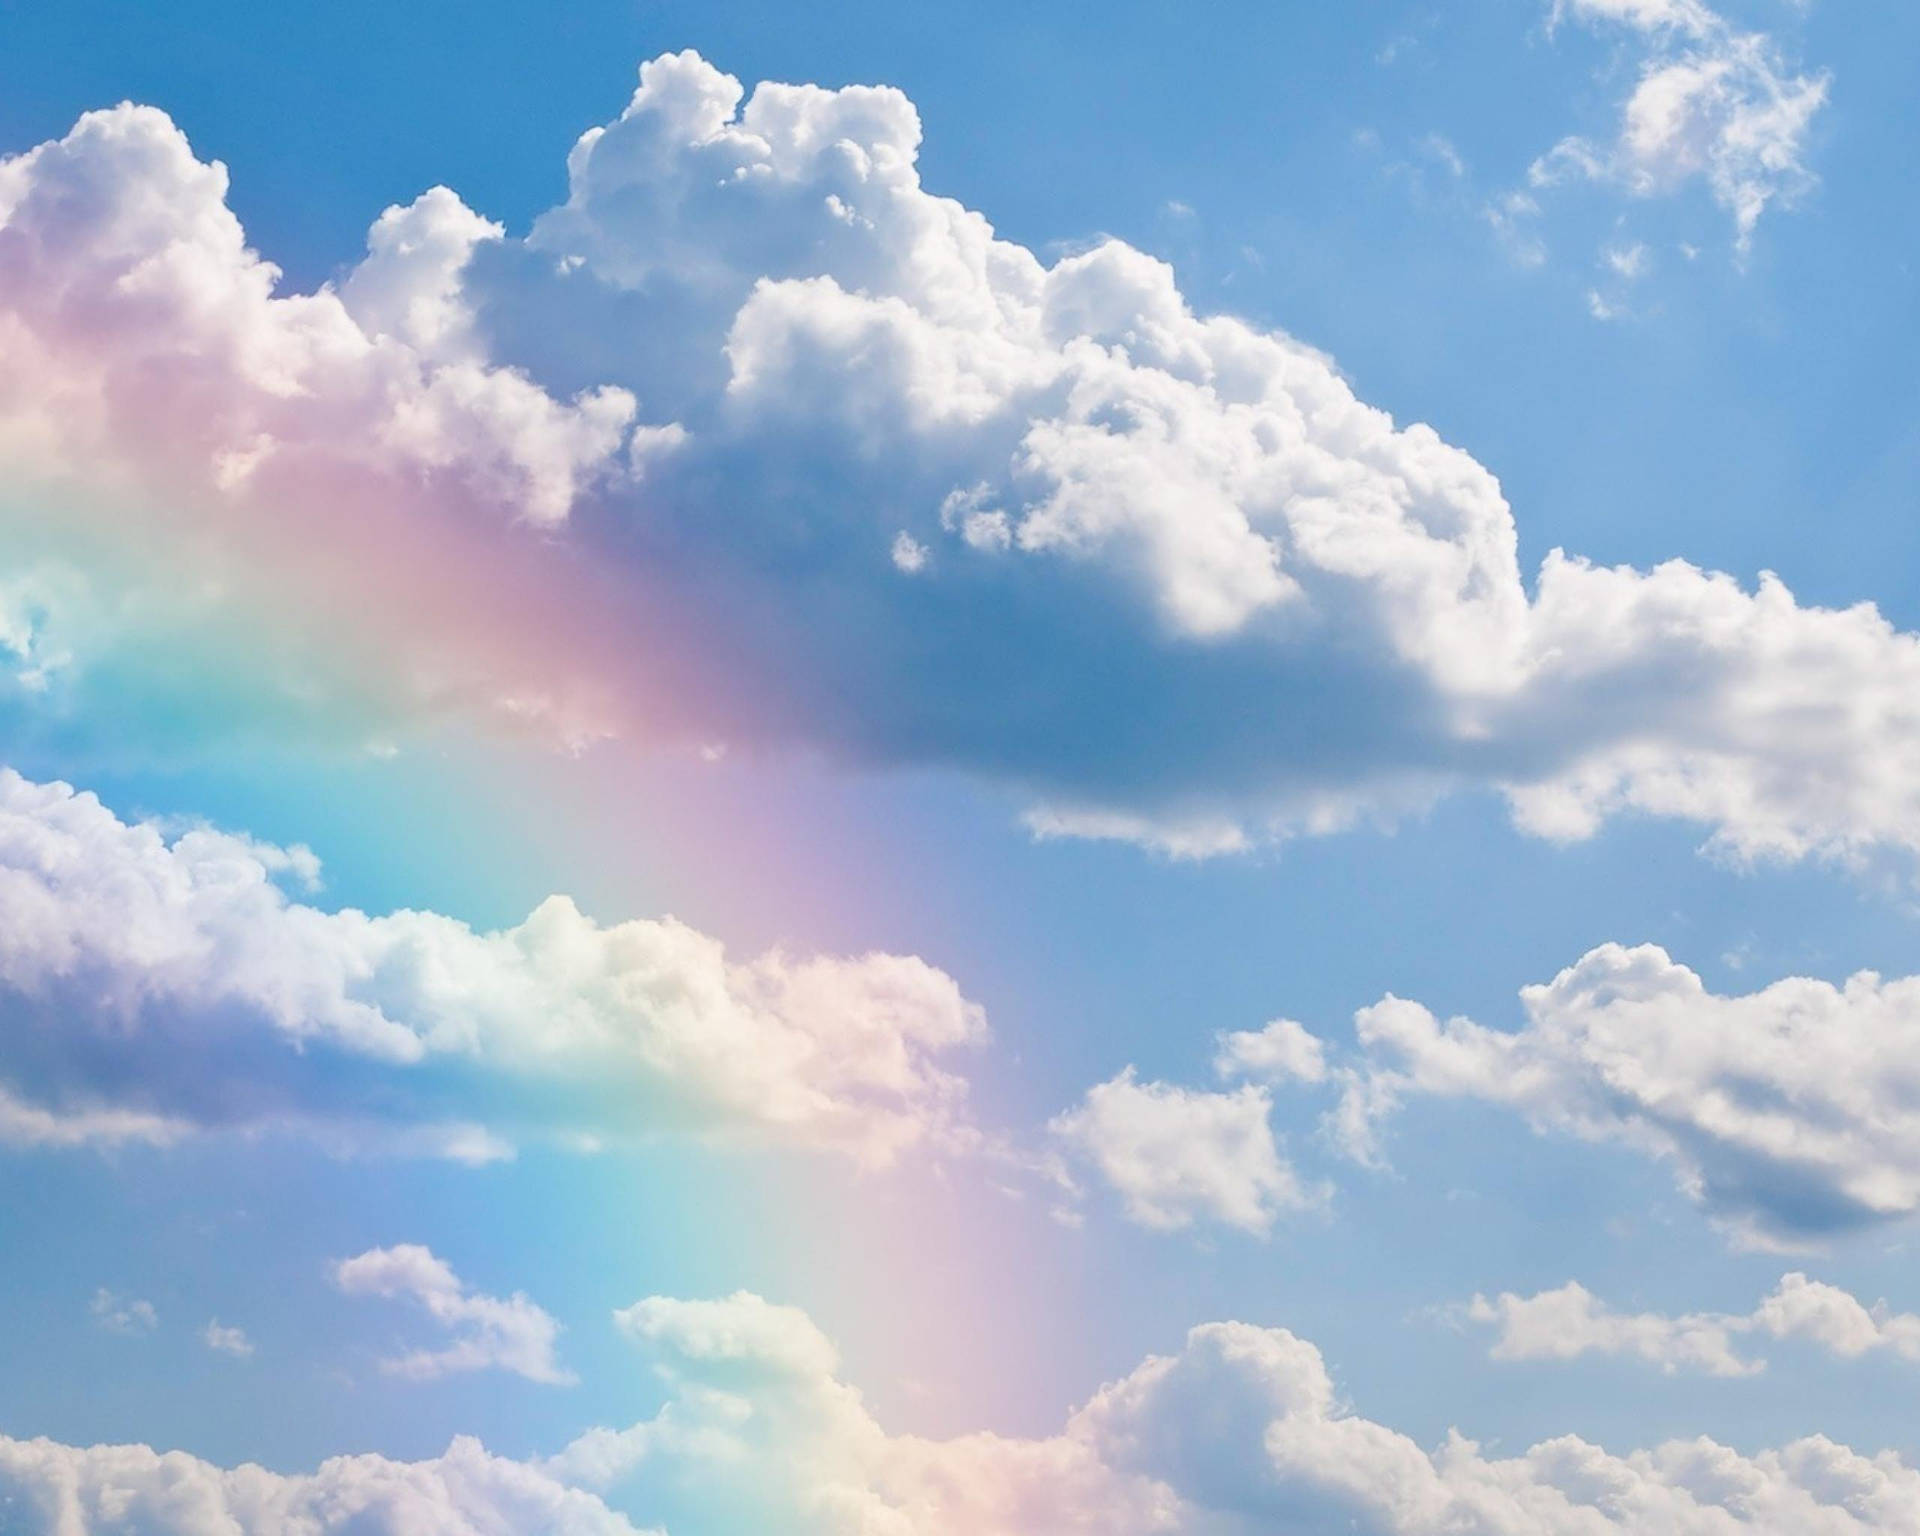 "A Harmonious Blend of Blue Aesthetics and a Rainbow in the Clouds" Wallpaper